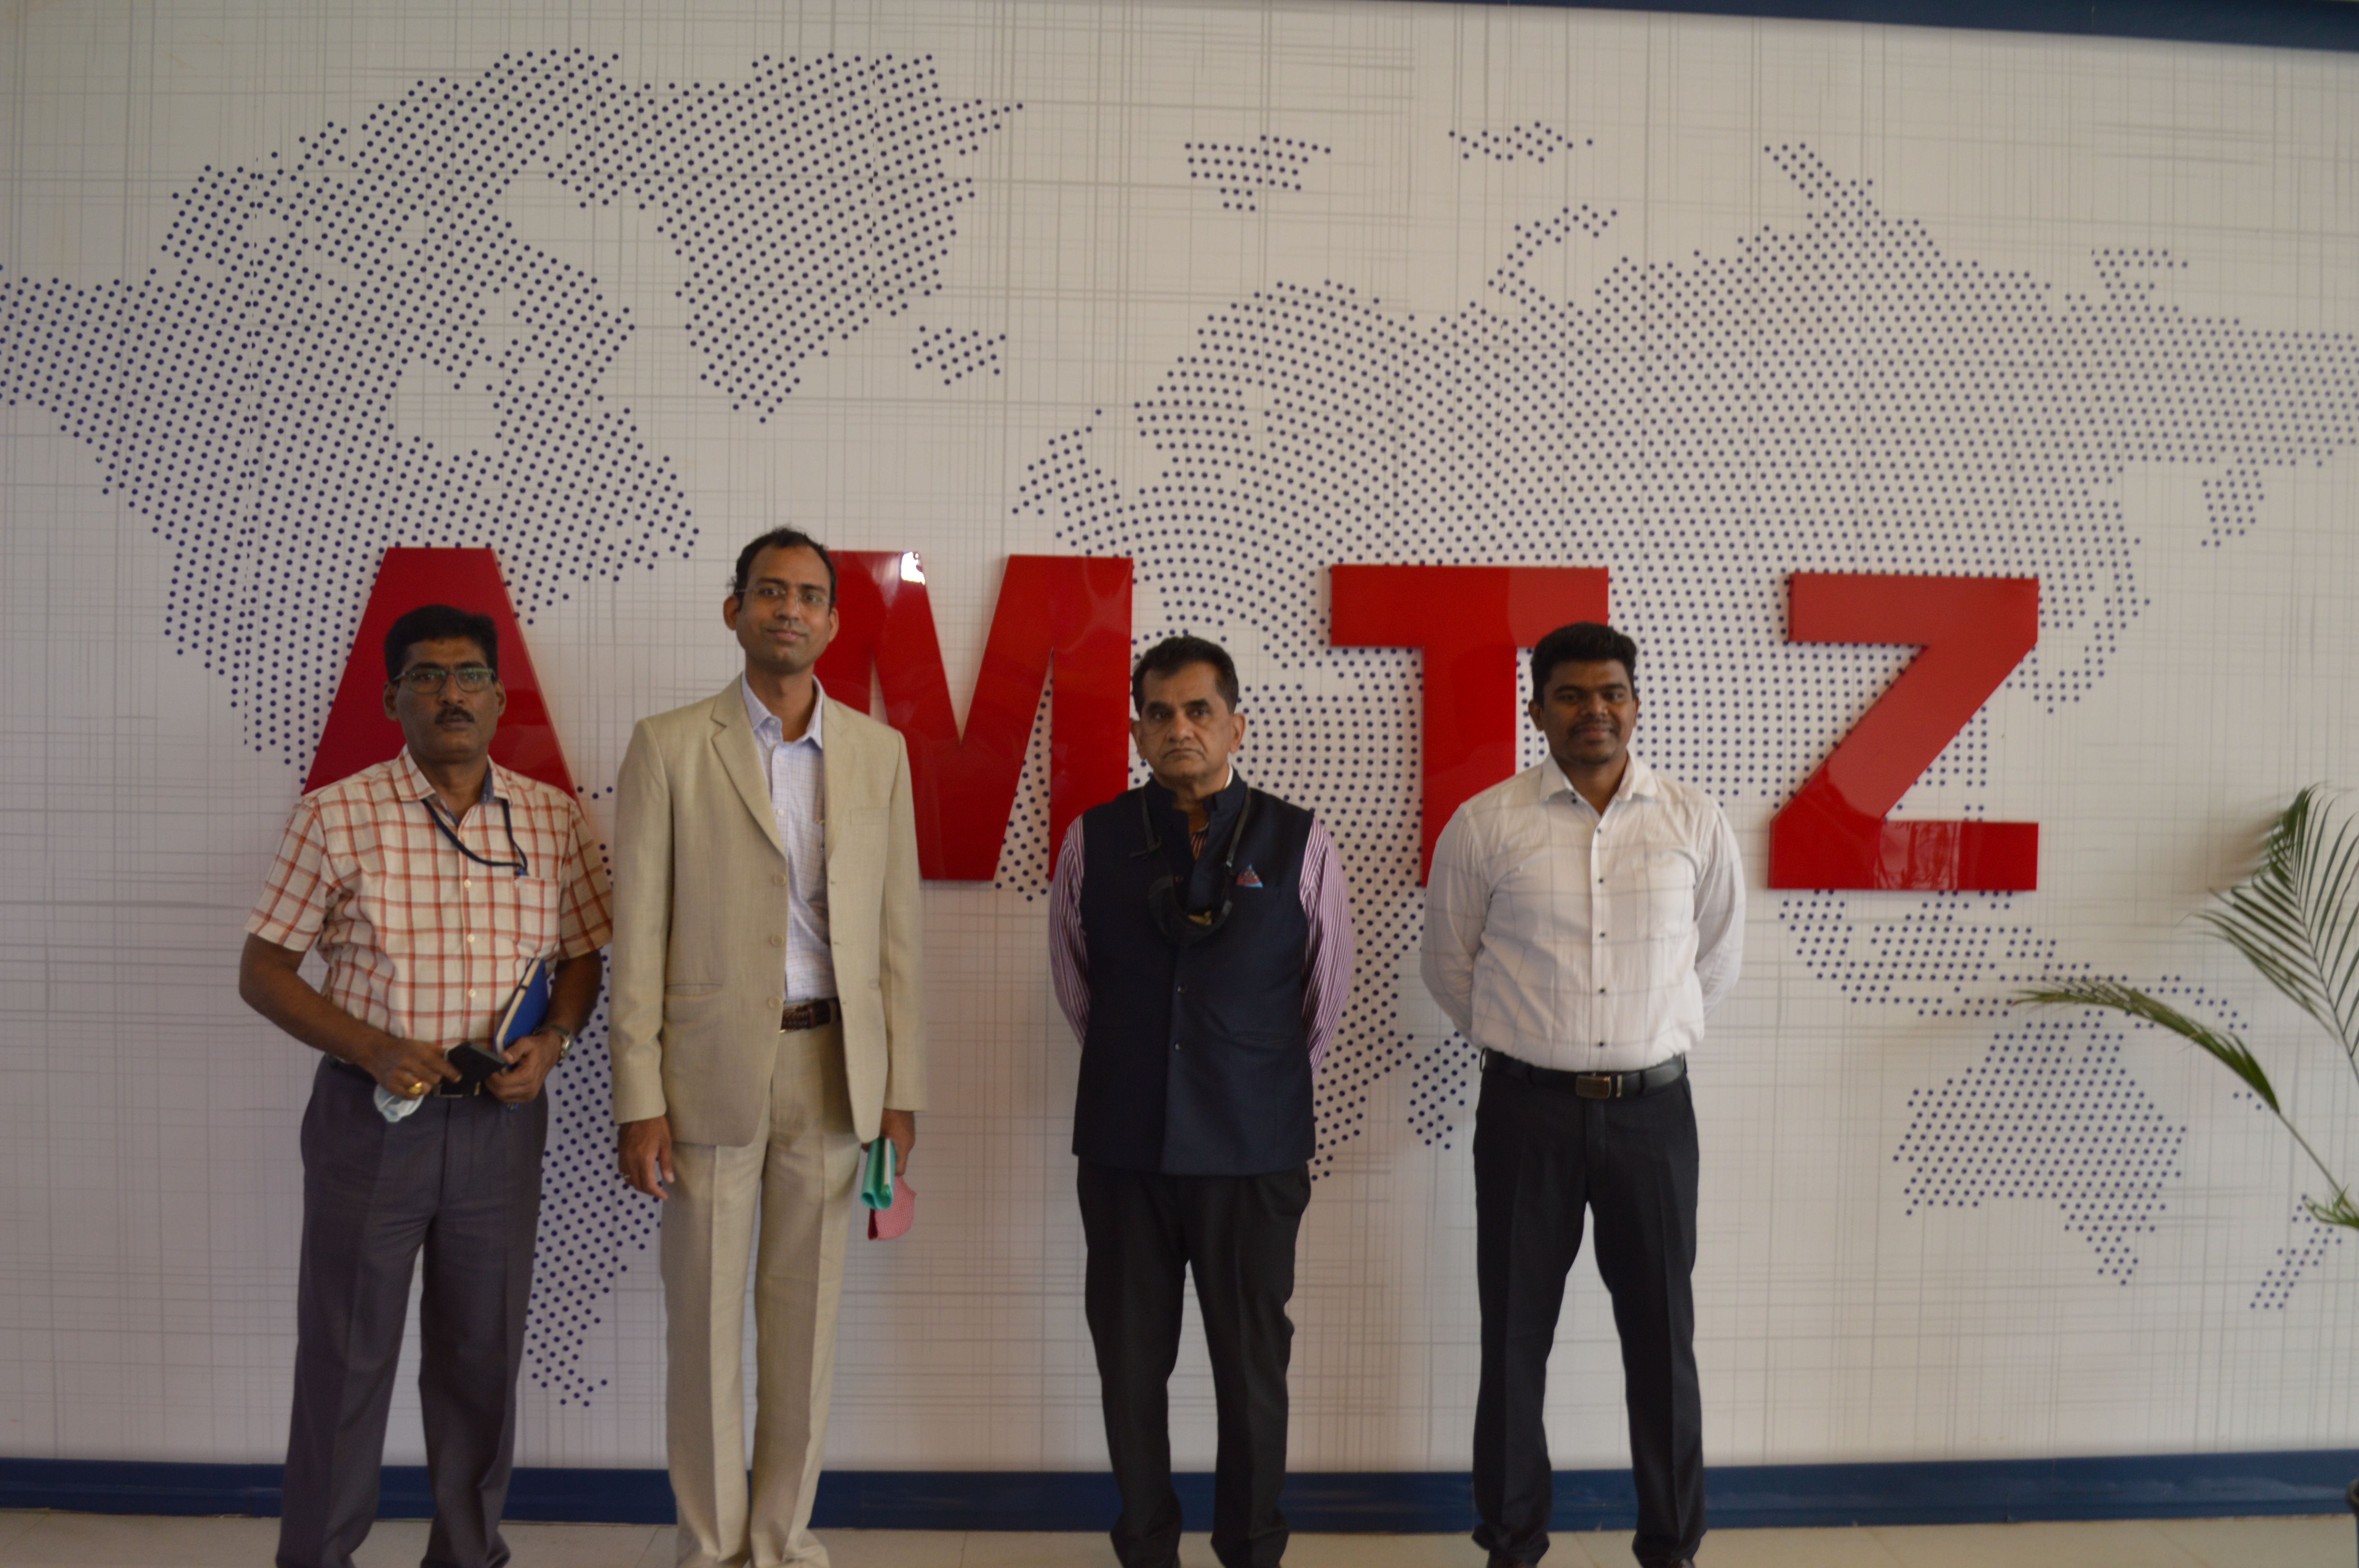 Dr. Jitendra Sharma of AMTZ meets with Mr. Amitabh Kant, Former CEO of Niti Aayog, at the AMTZ campus to discuss Health Care Technology and Medical Care Technology in India